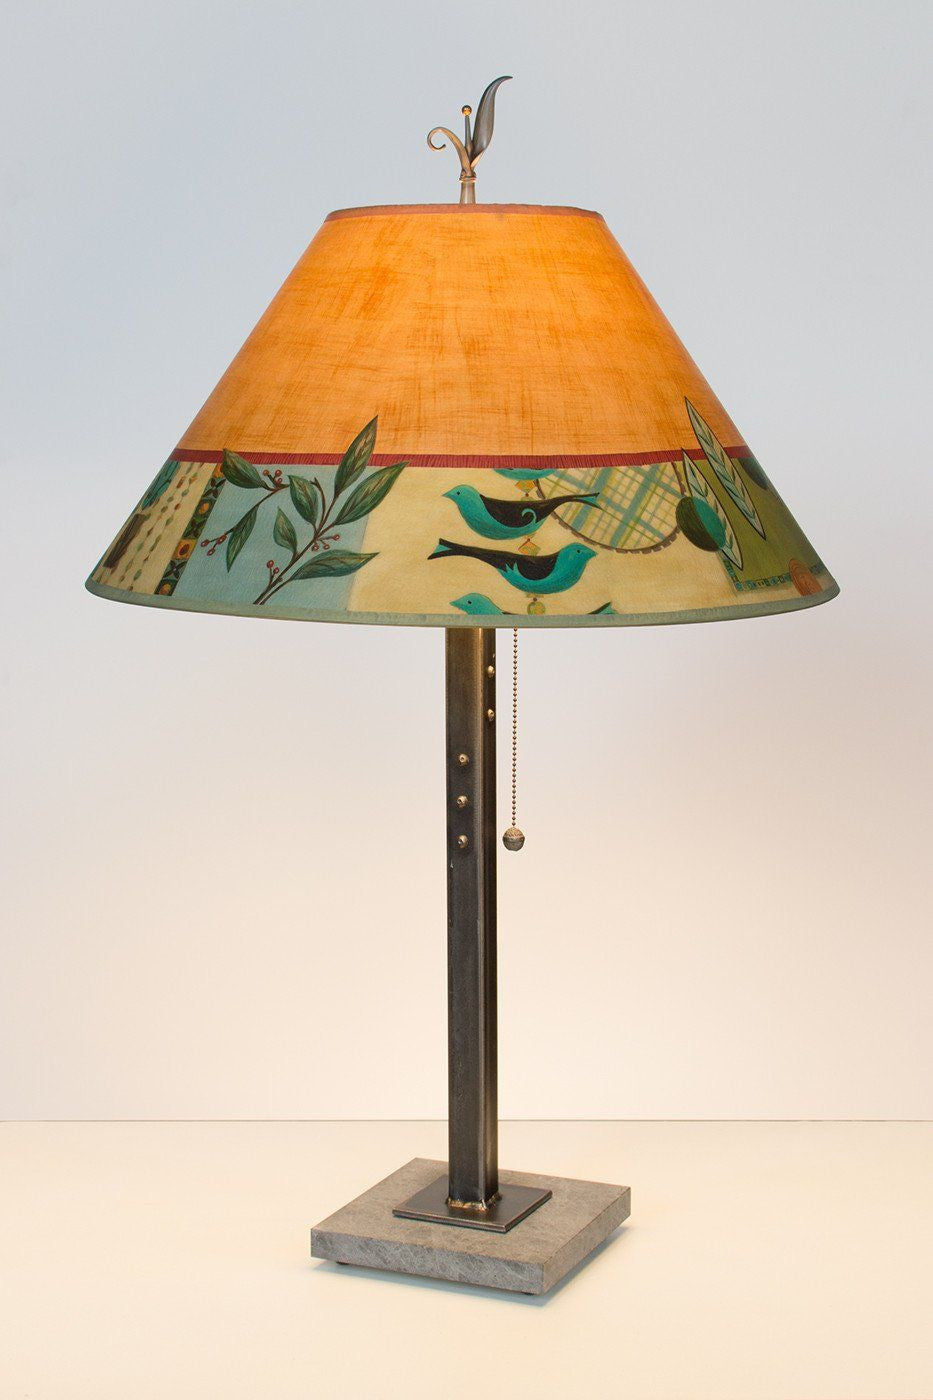 Janna Ugone &amp; Co Table Lamps Steel Table Lamp with Large Conical Shade in New Capri Spice